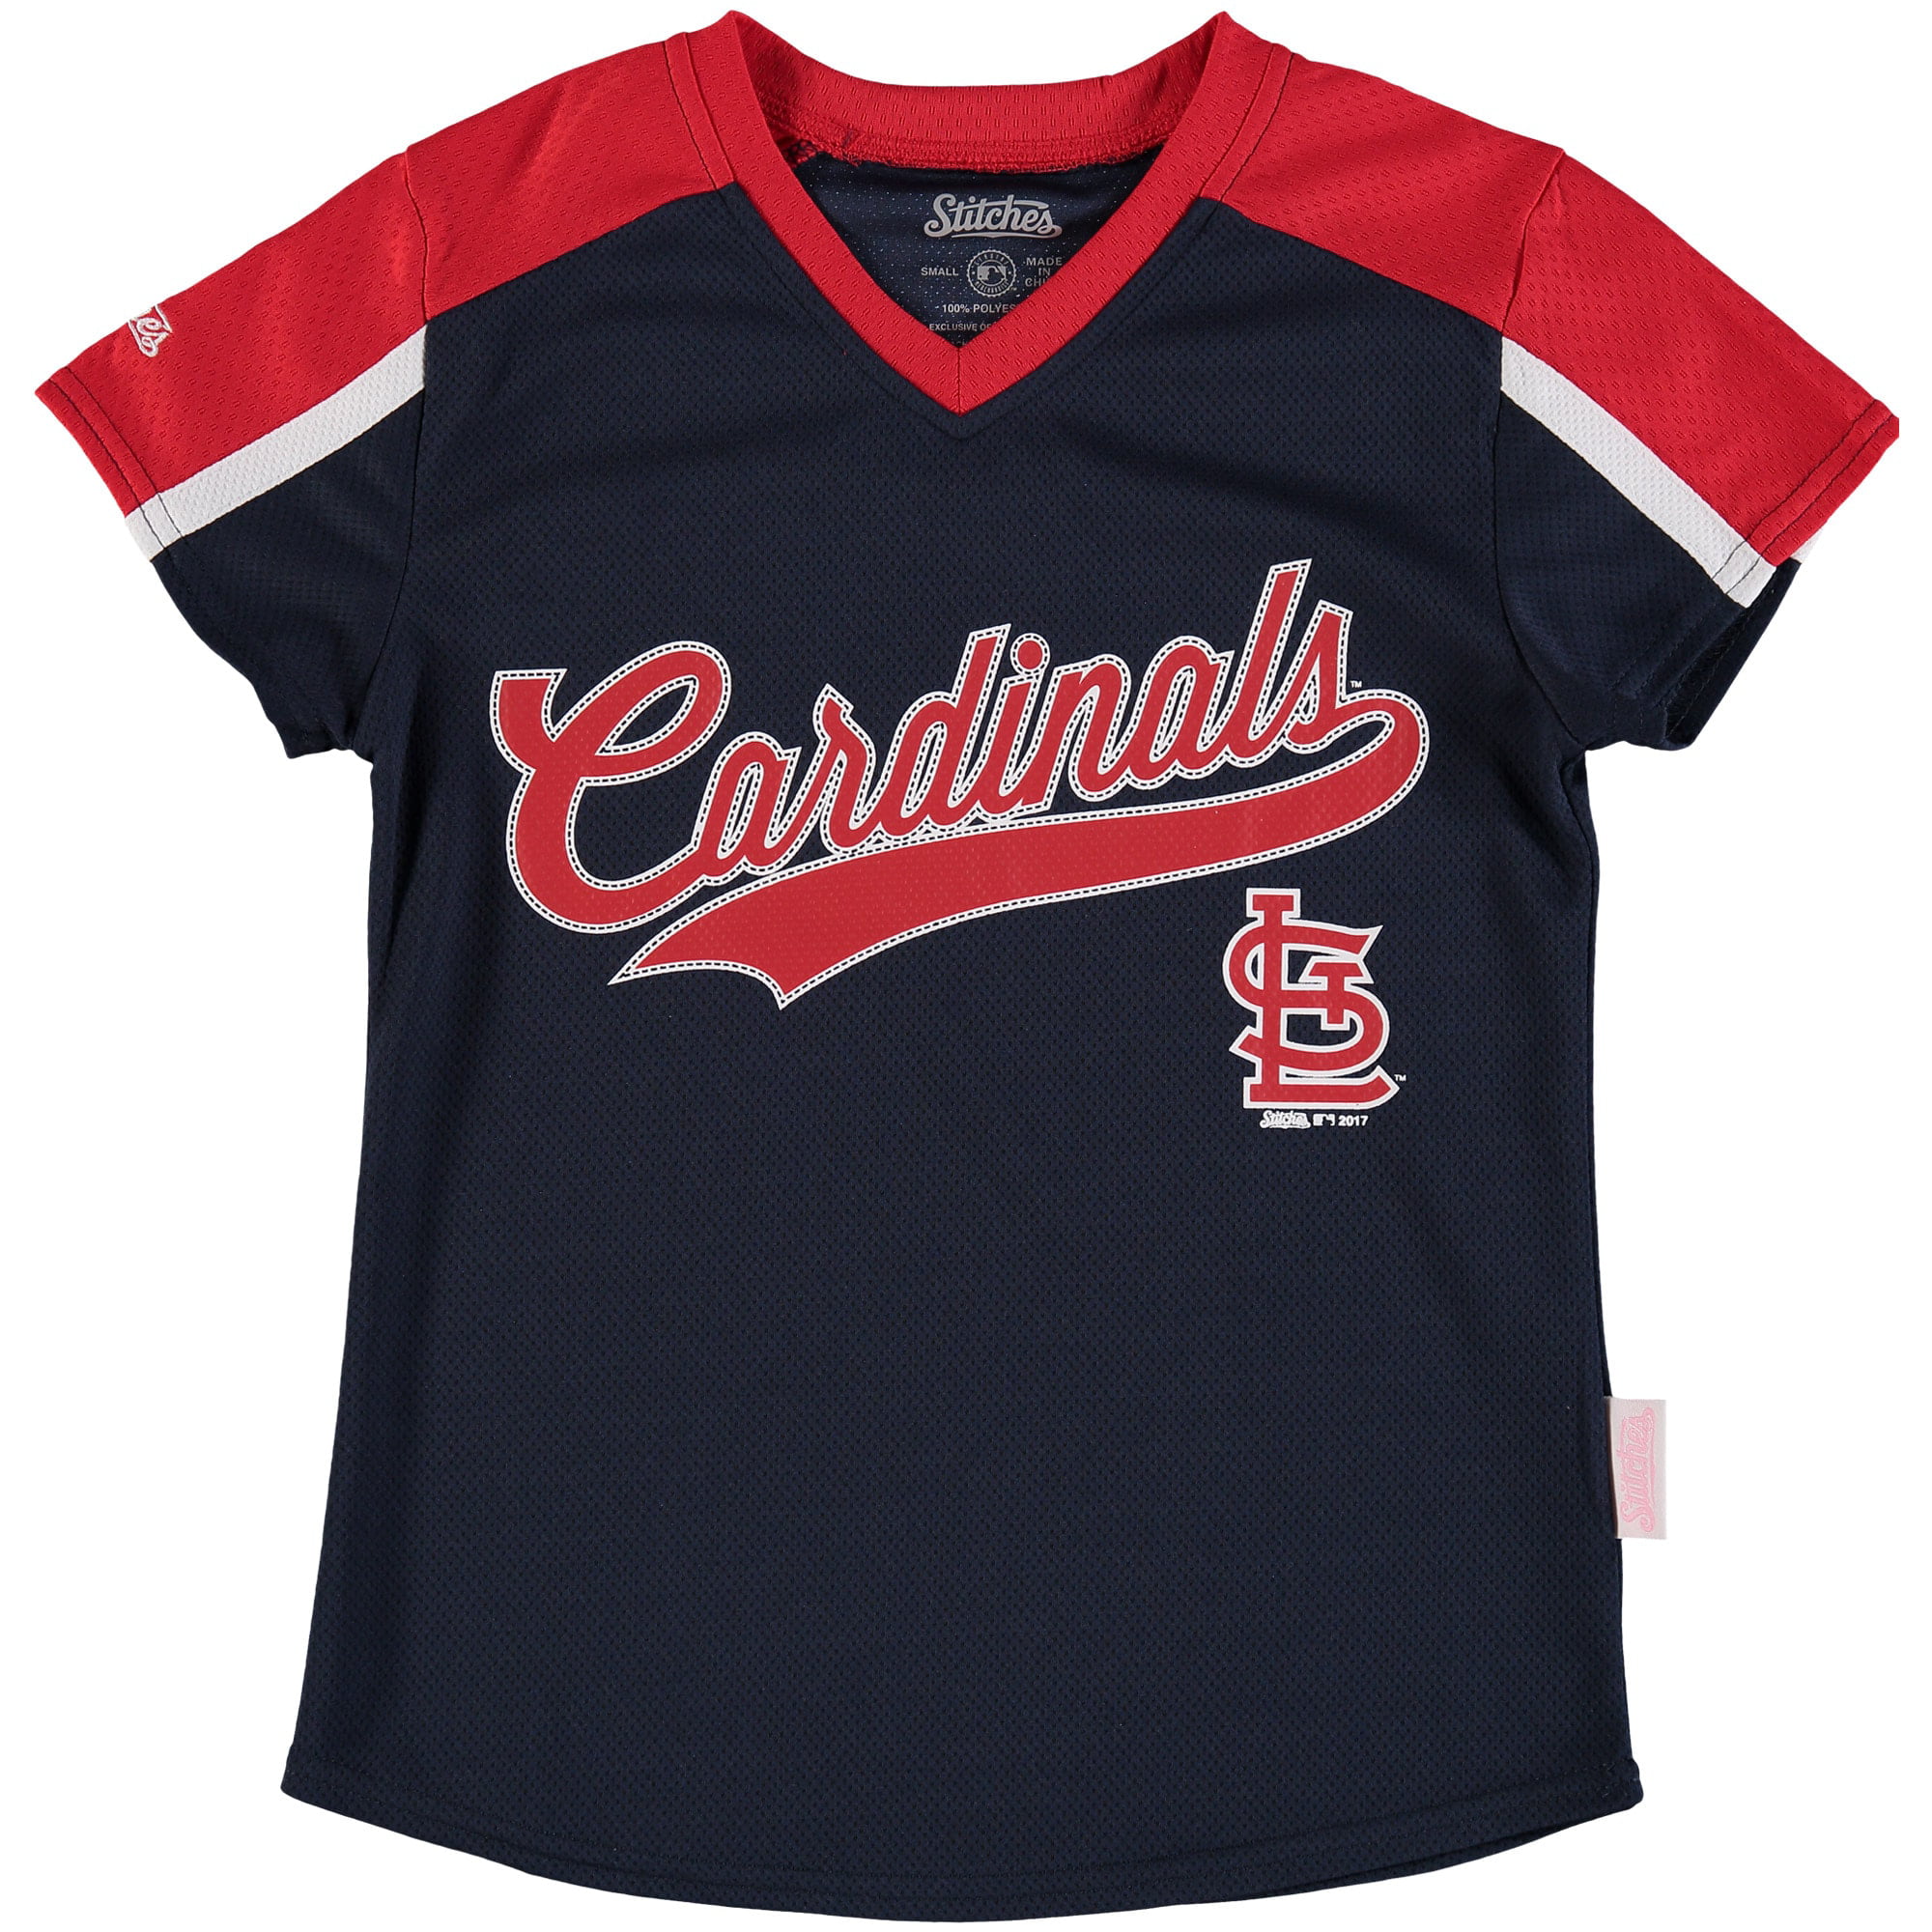 St. Louis Cardinals Stitches Girls Youth V-Neck Jersey T ...